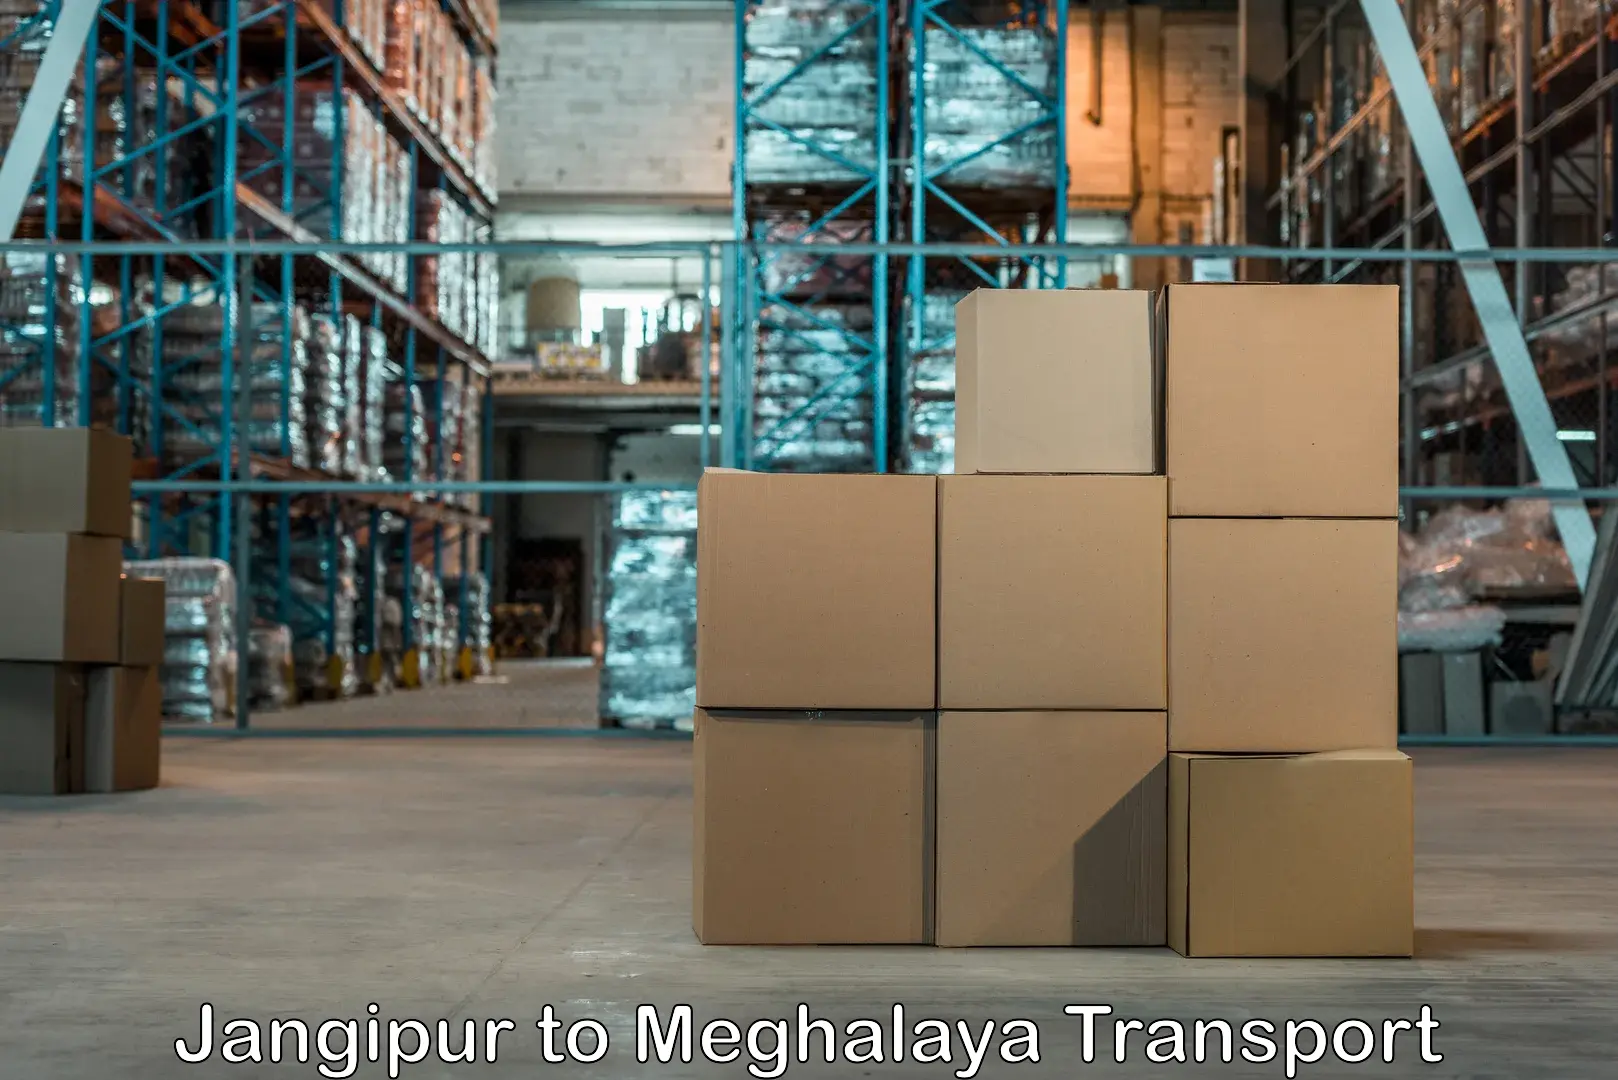 Truck transport companies in India Jangipur to Tura